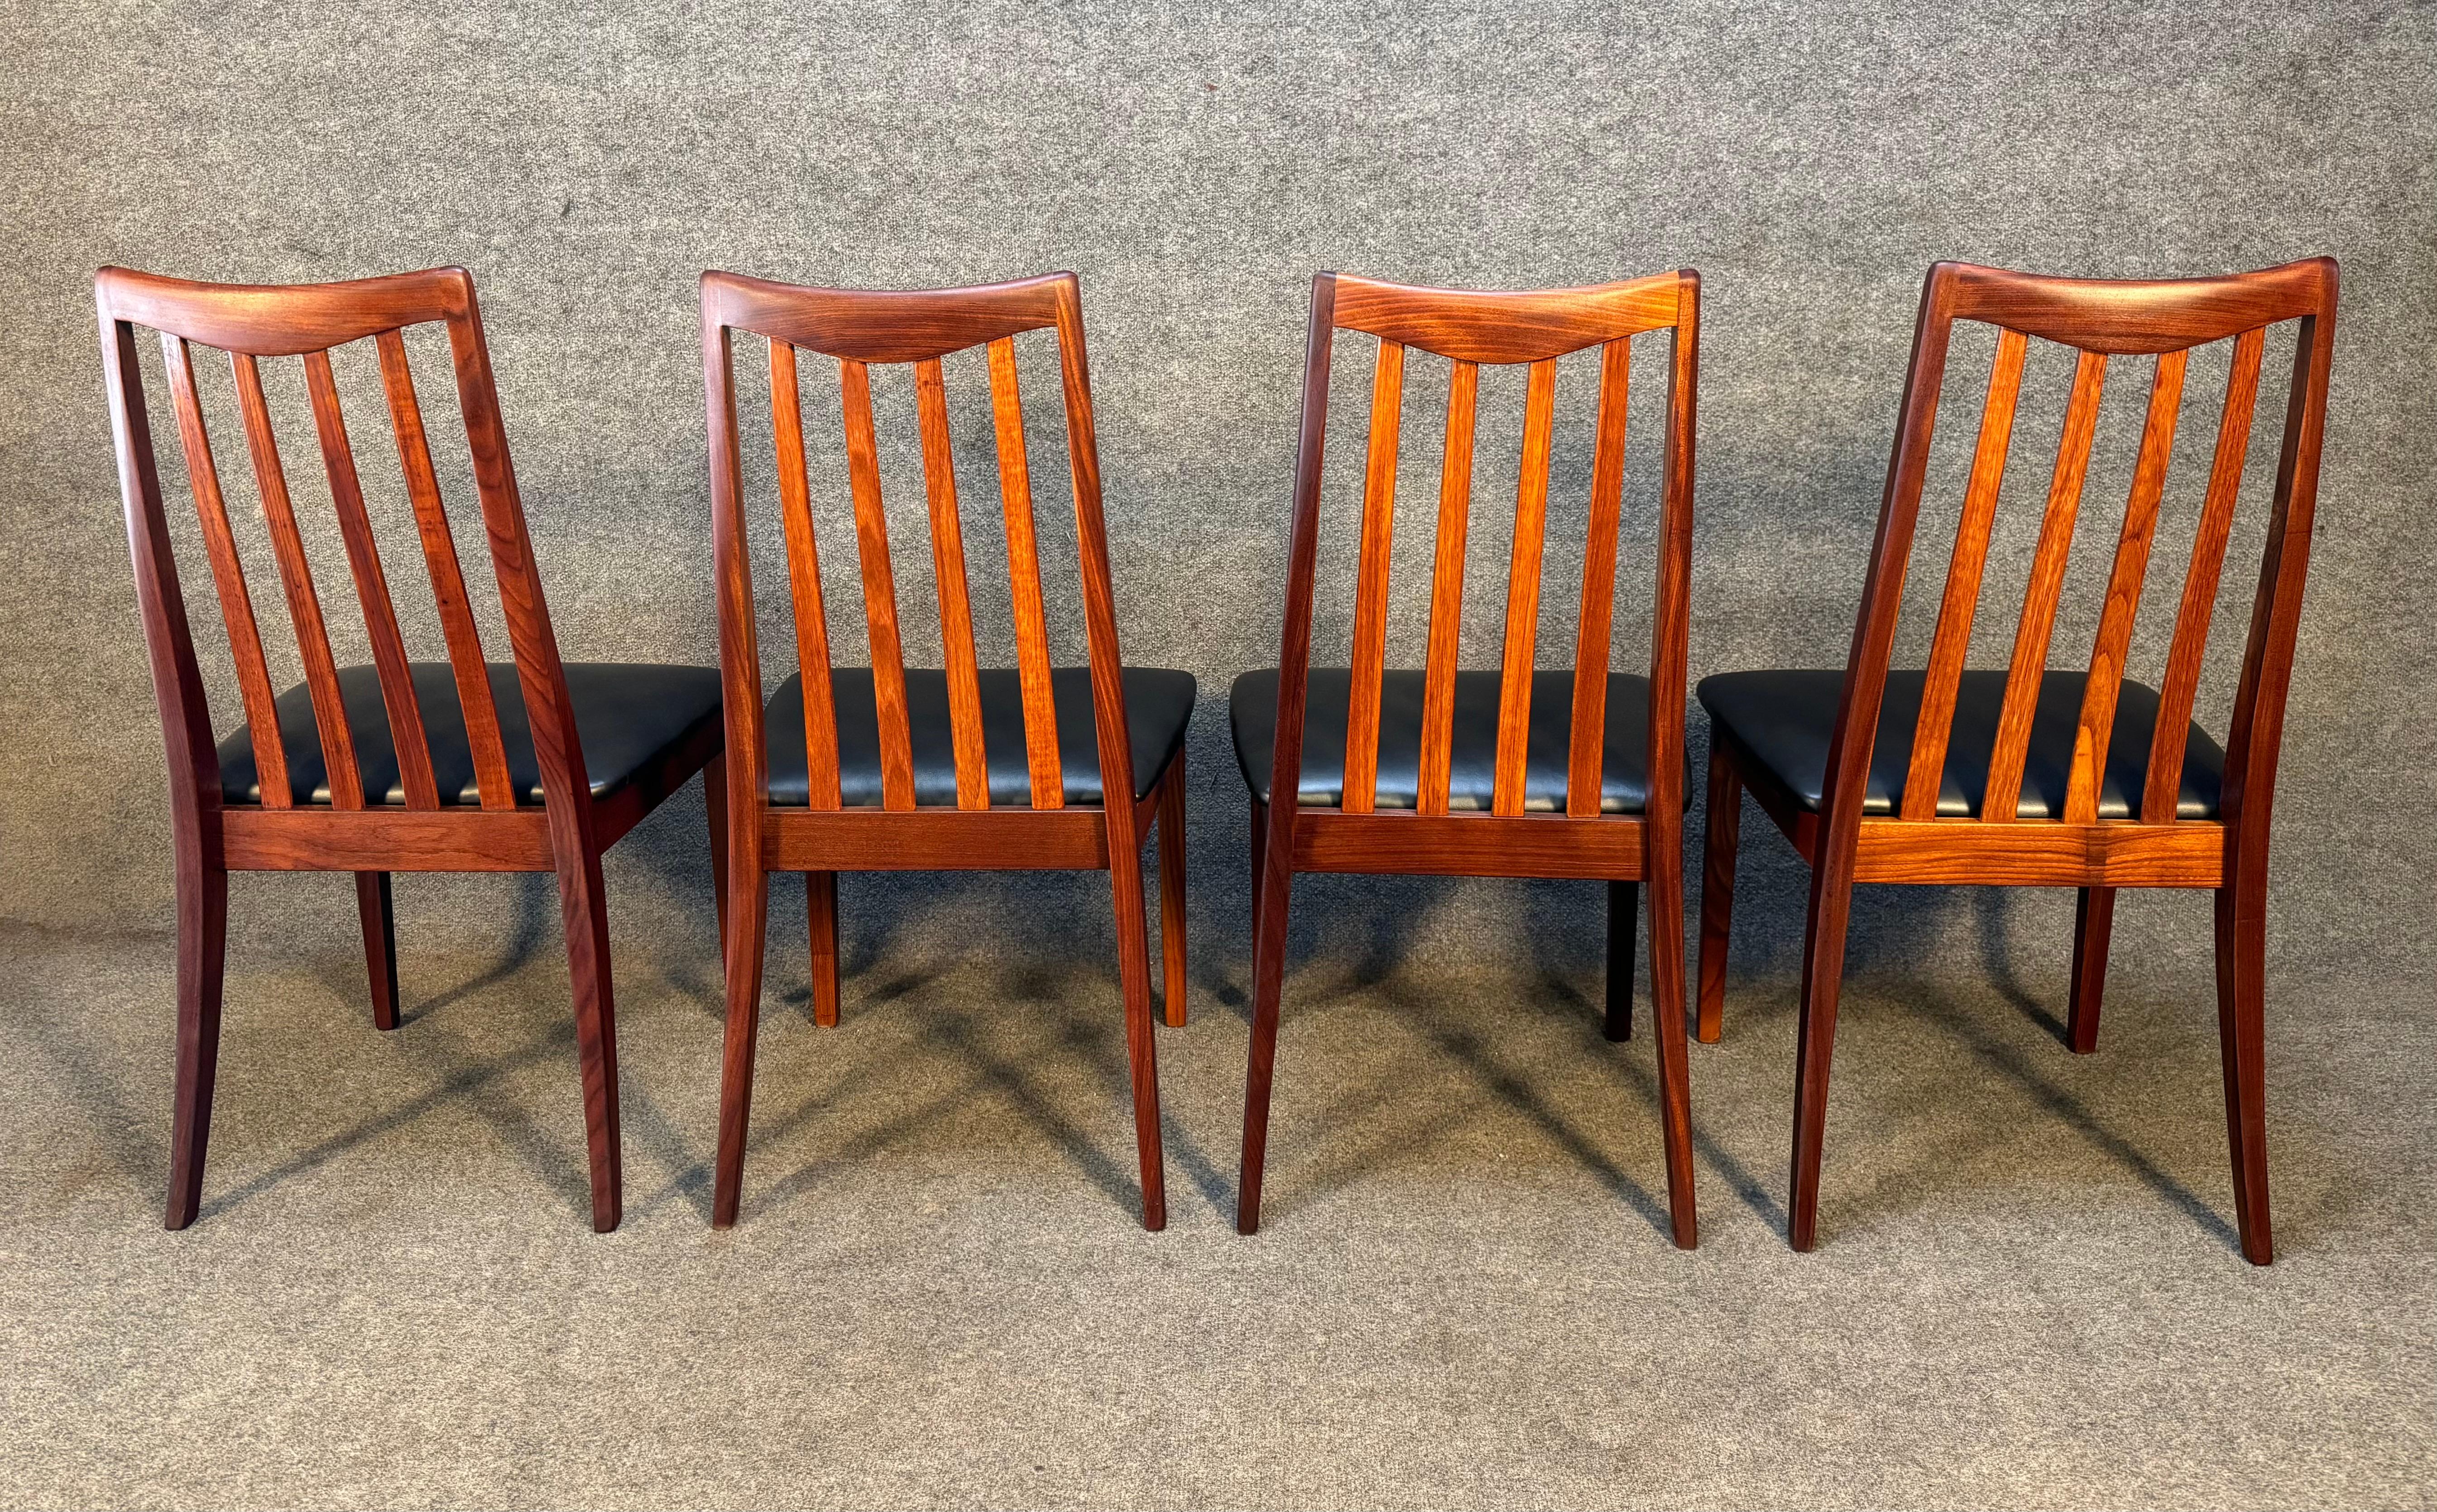 Set of Four Vintage British Mid Century Modern Teak Dining Chairs by G Plan In Good Condition For Sale In San Marcos, CA